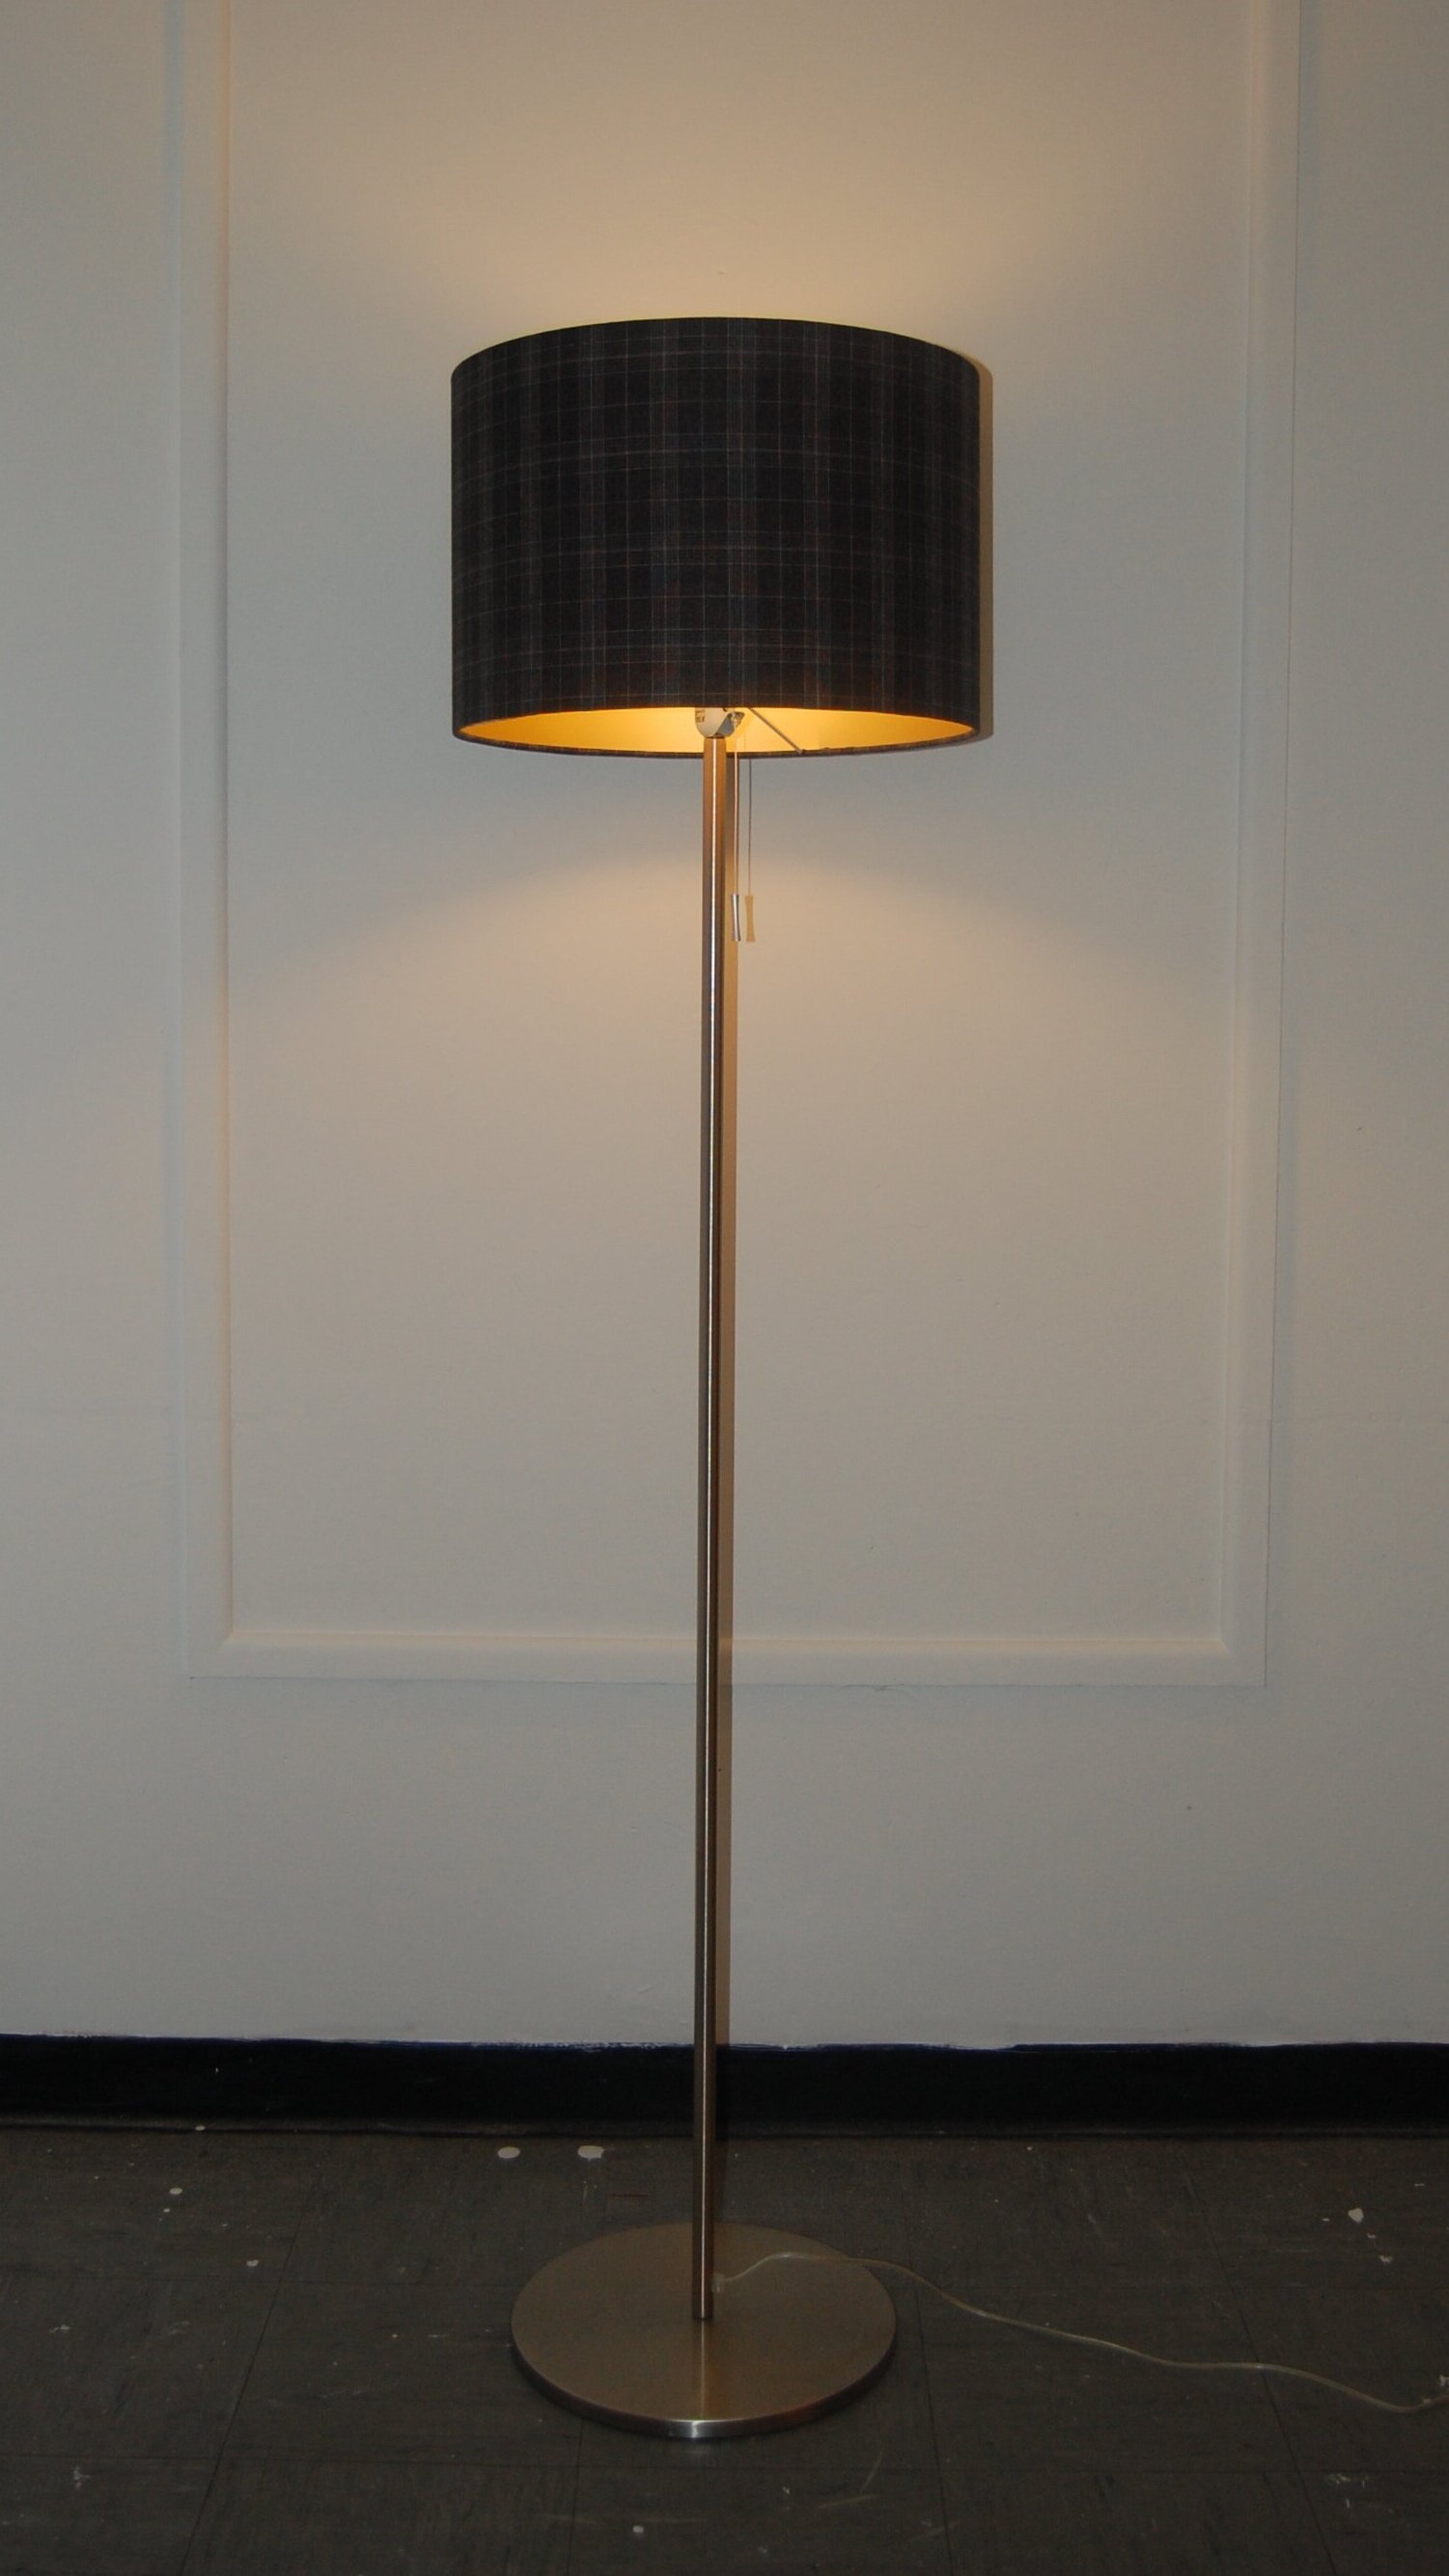 Bespoke Floor Lamp Shades And Standard, Large Lamp Shades For Standard Lamps Uk